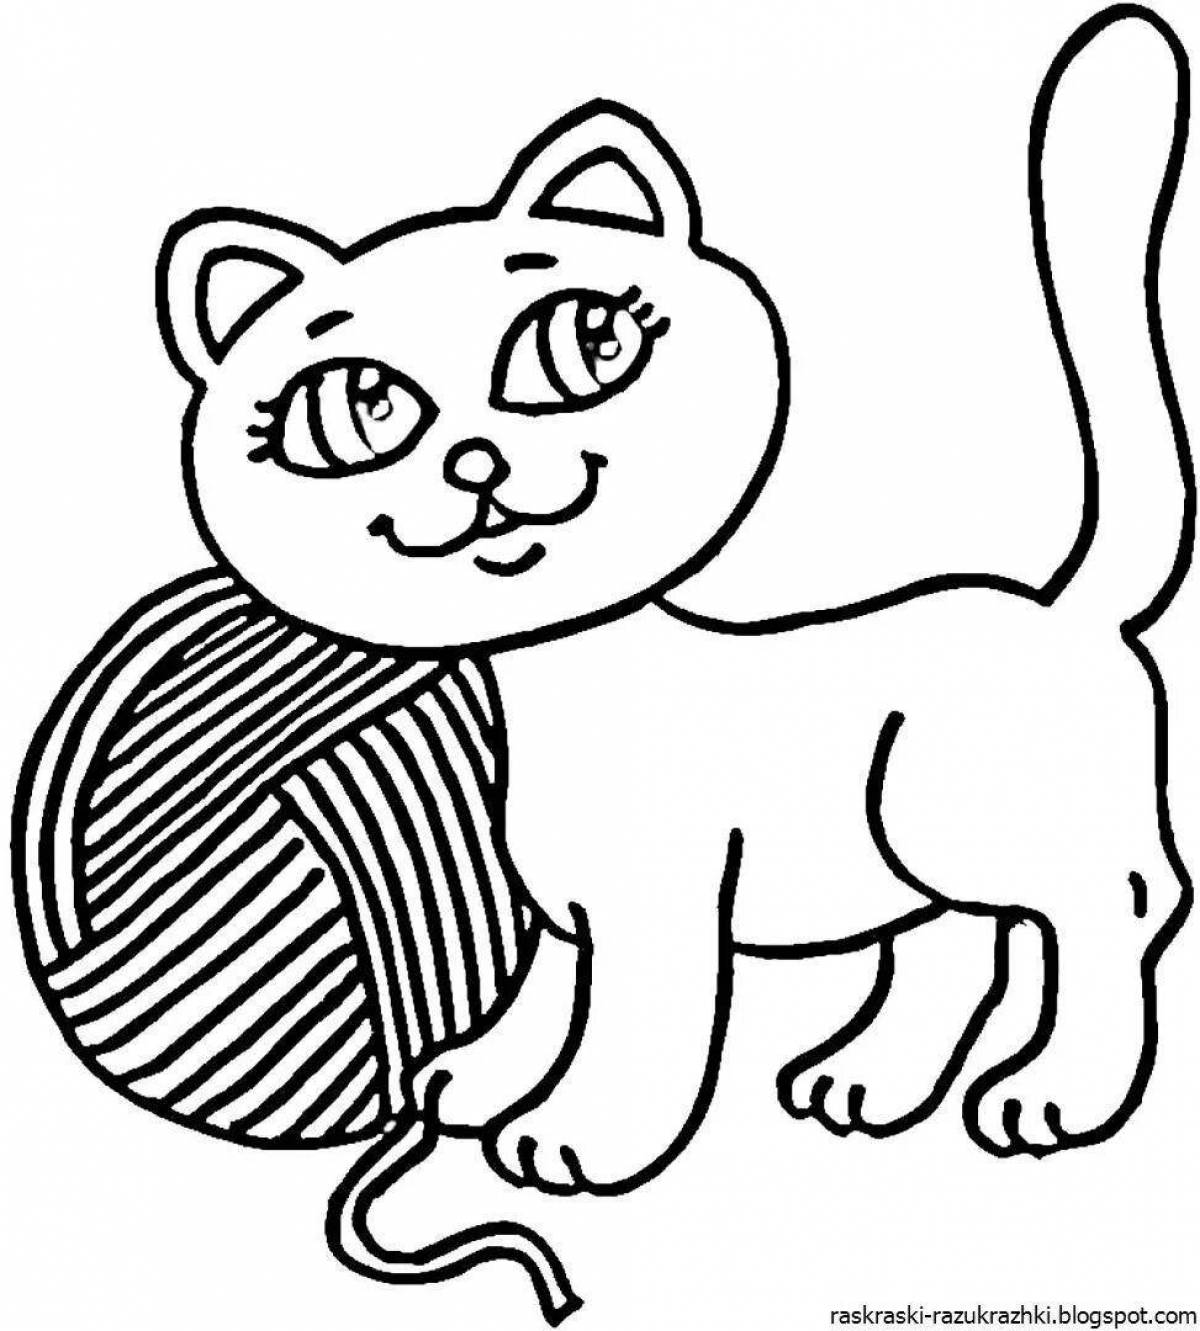 Coloring page graceful cat for kids